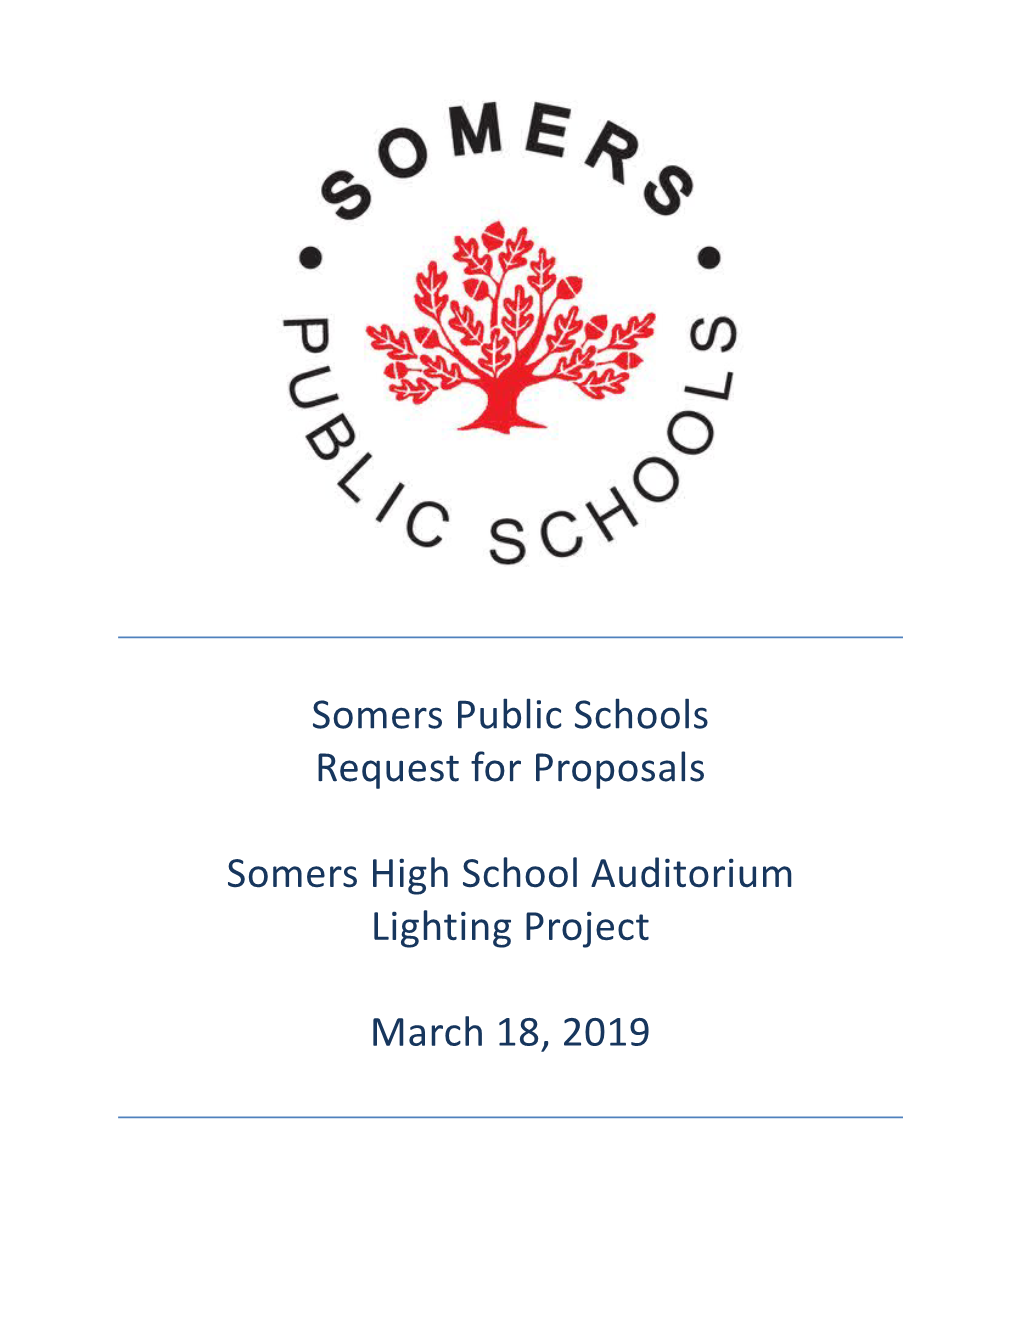 Somers Public Schools Request for Proposals Somers High School